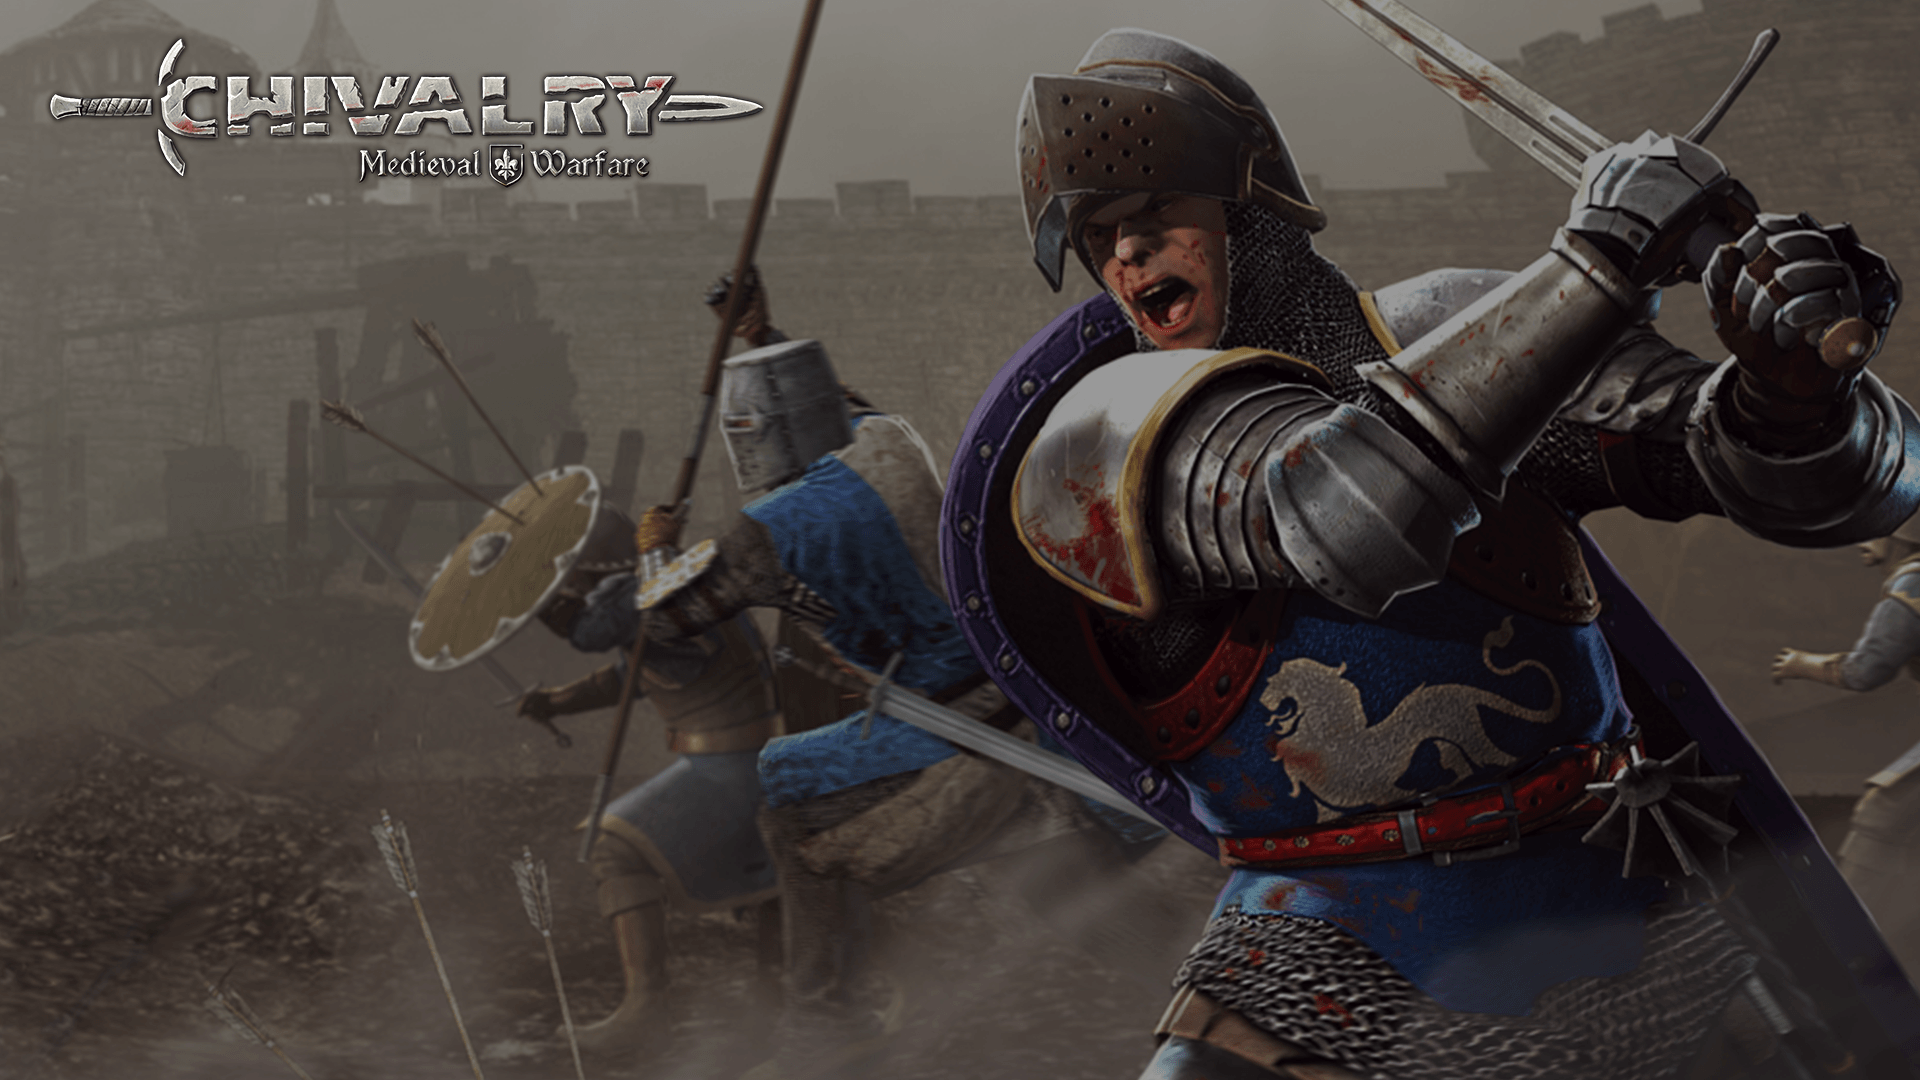 Chivalry 2 Wallpapers